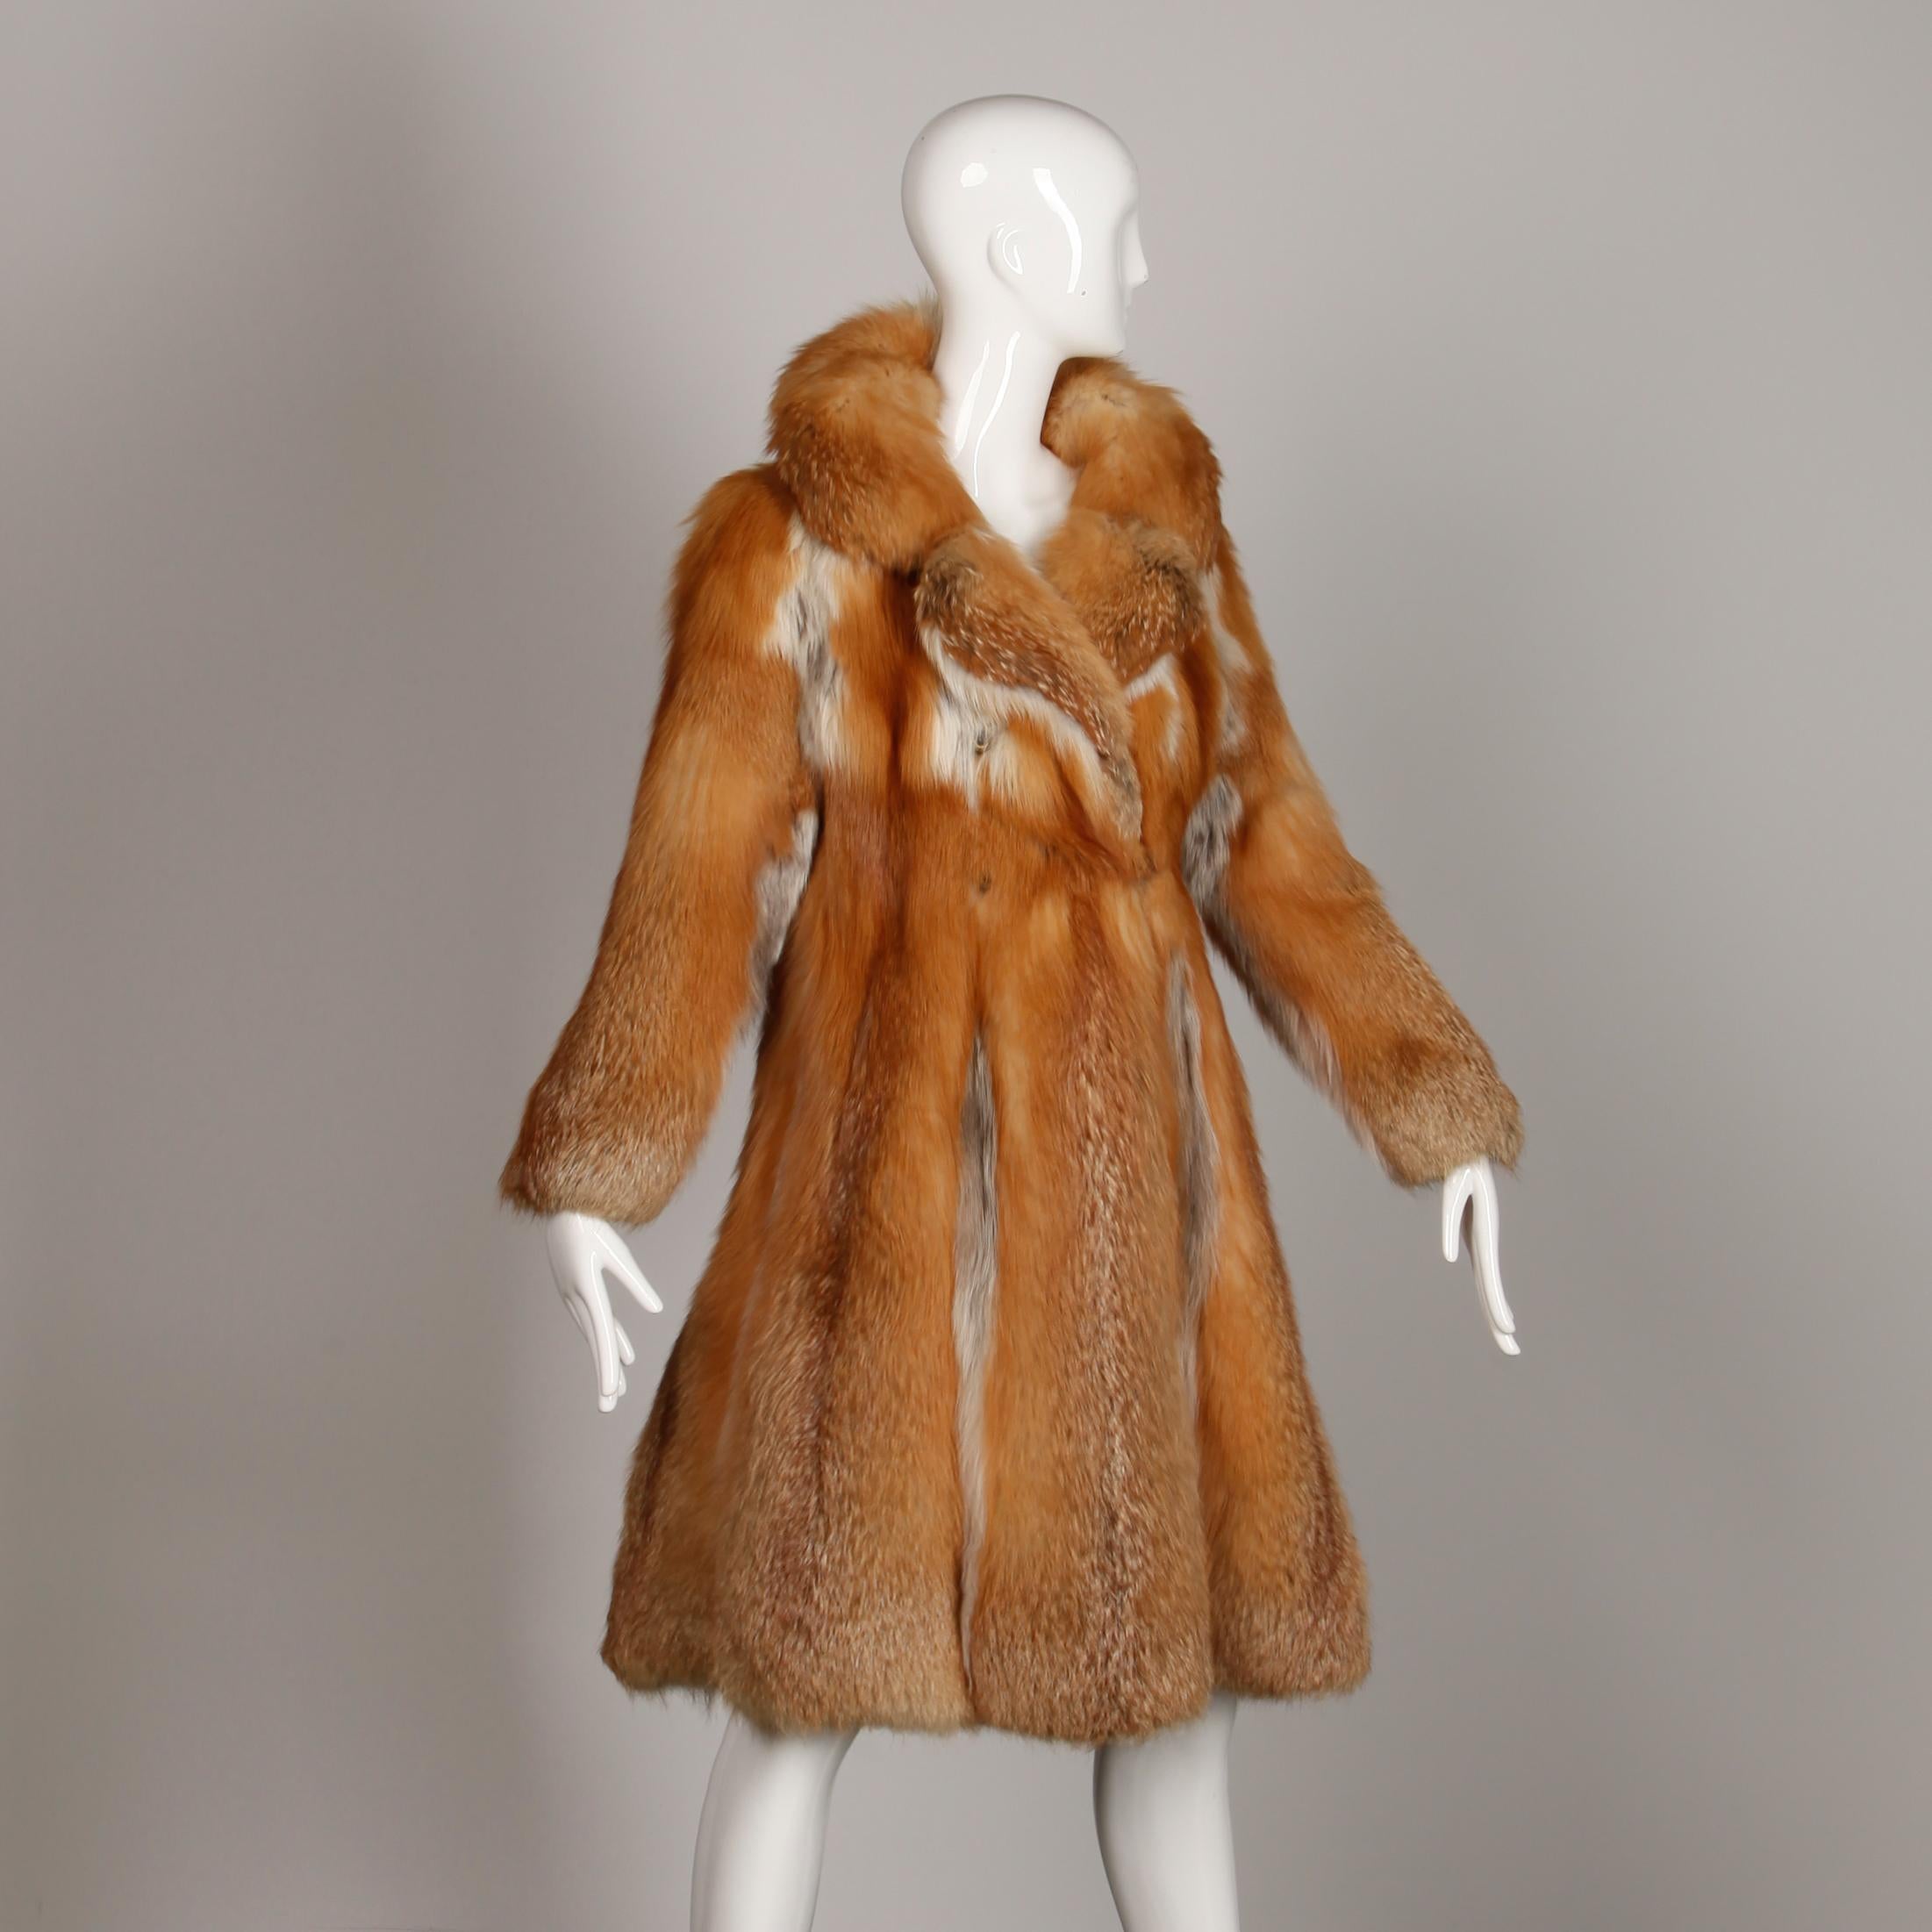 Stunning vintage 1970s red fox fur coat. Fully lined in black fabric with cashmere-lined pockets and front button/ loop closure. Embroidered monogram reads Zena H. Made in Canada by Conklin Furs. There is no marked size but the coat fits like a